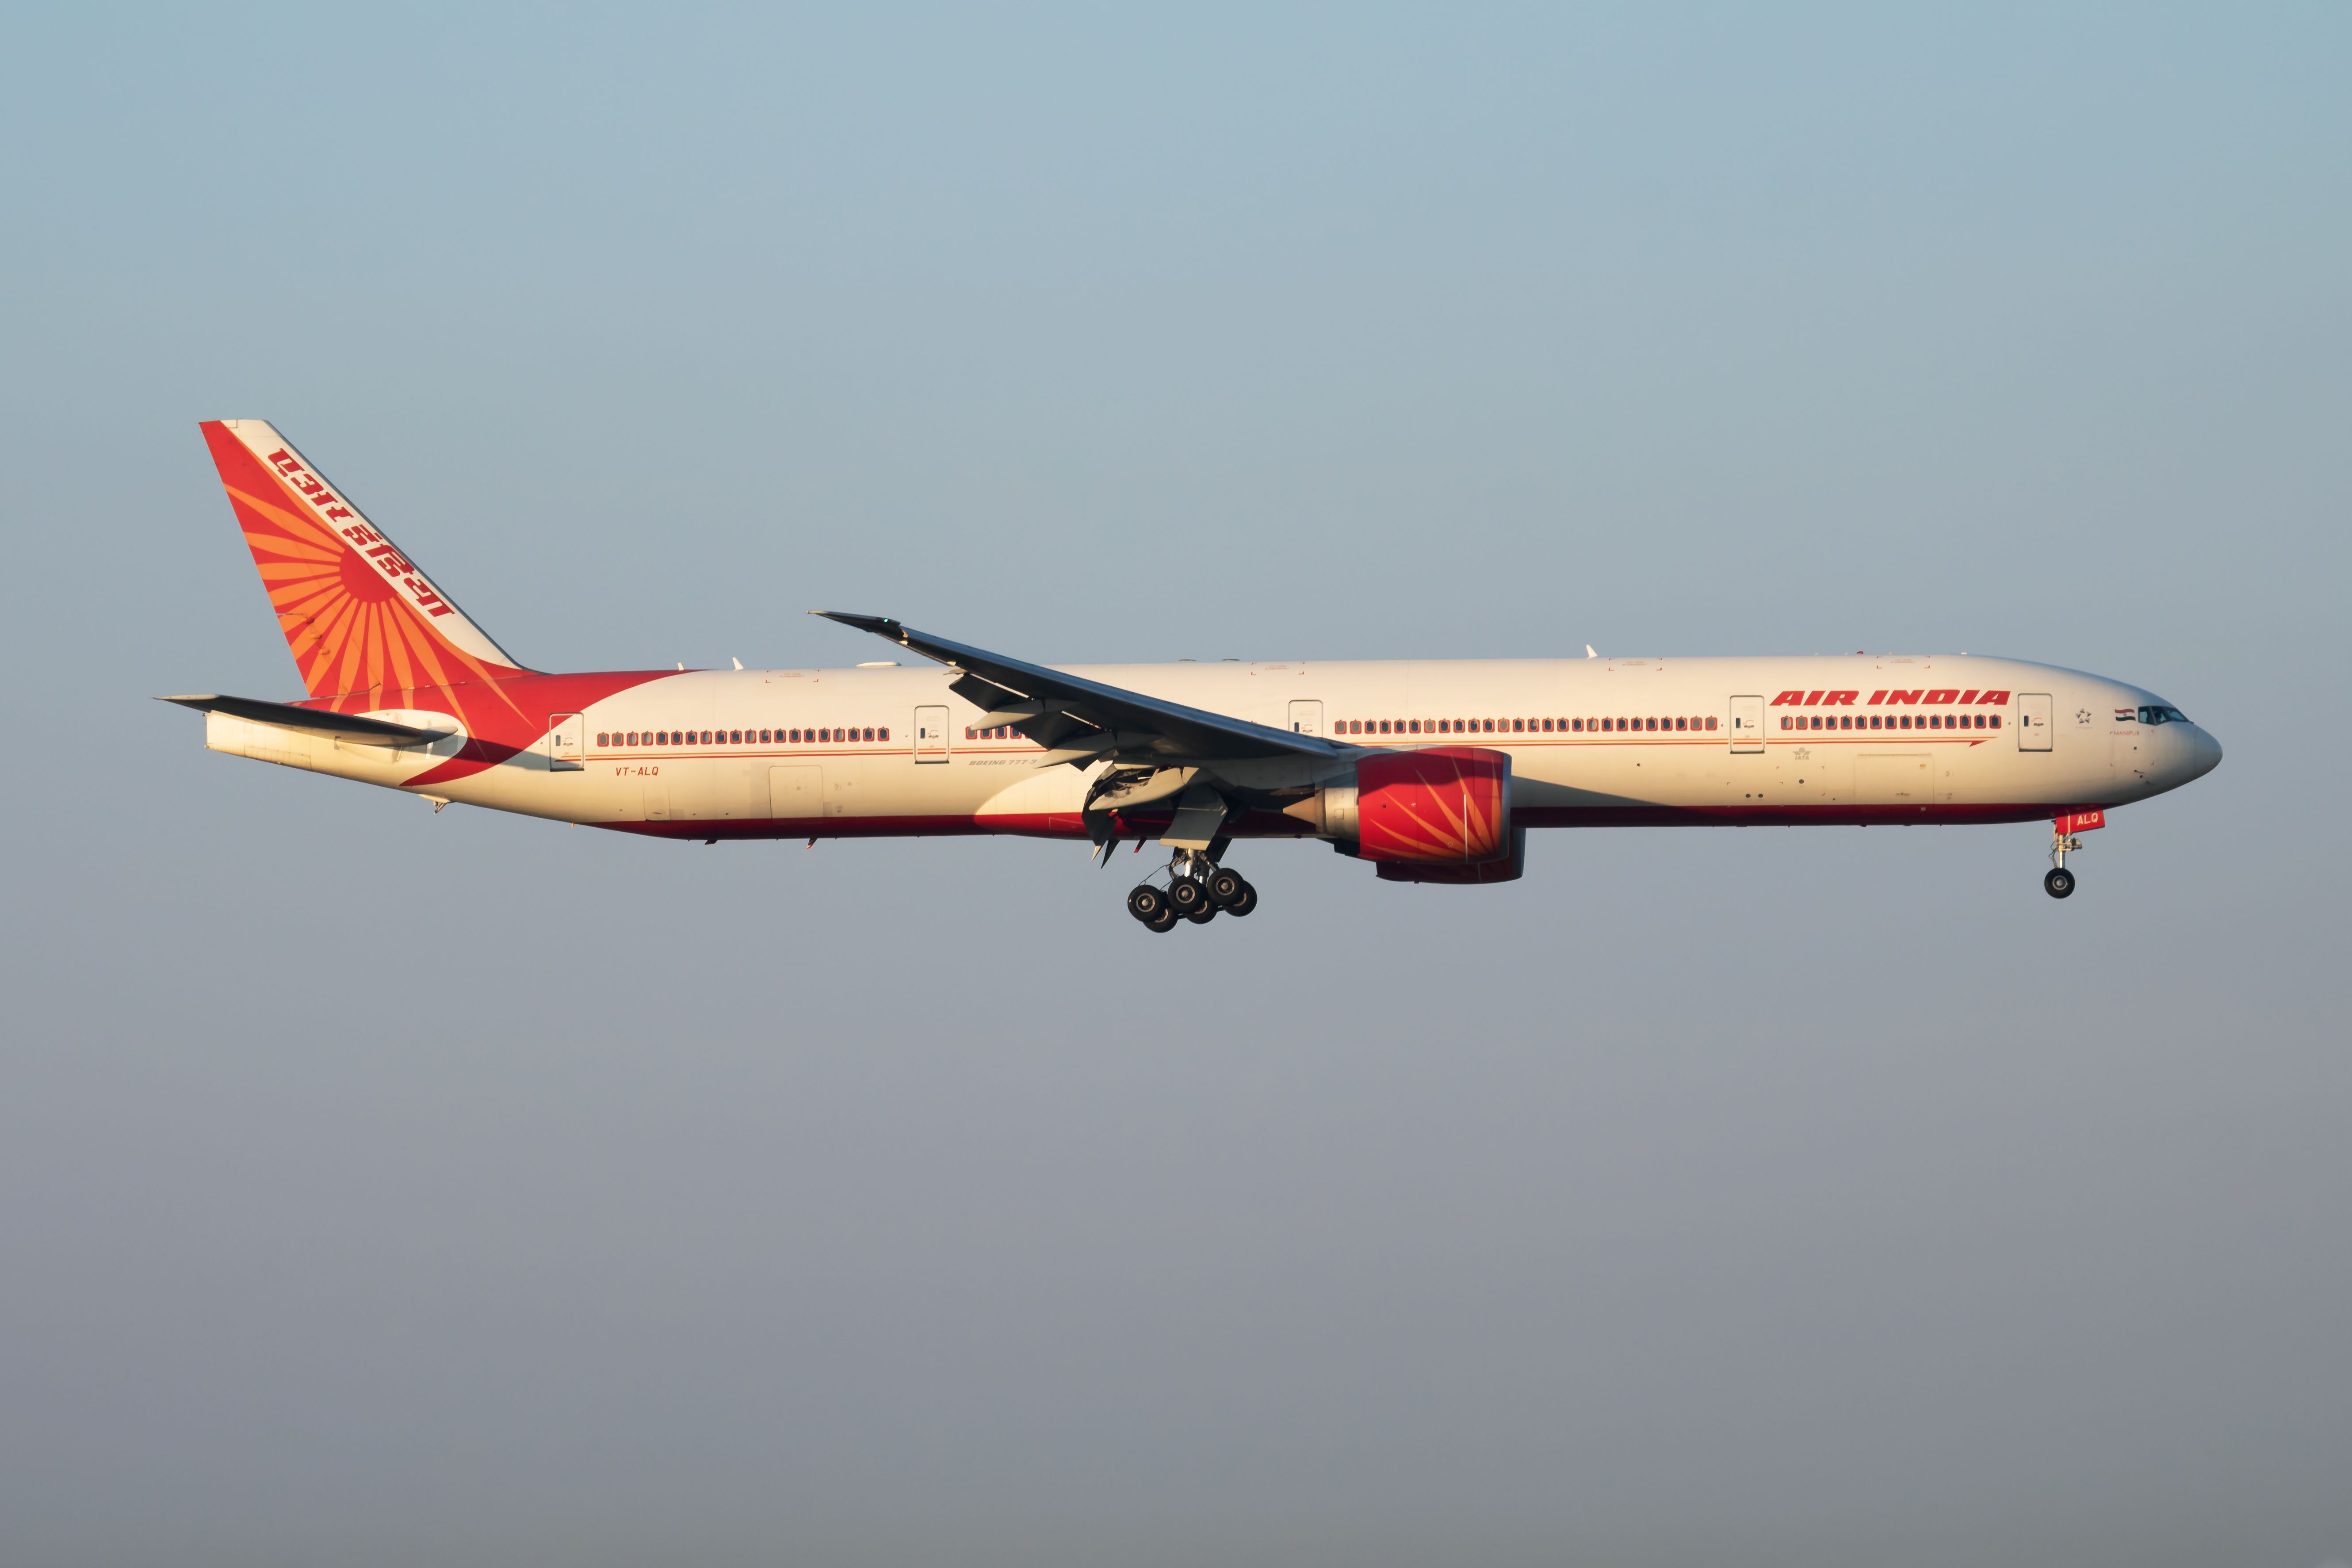 An Air India Boeing 777-300ER flying in the sky.